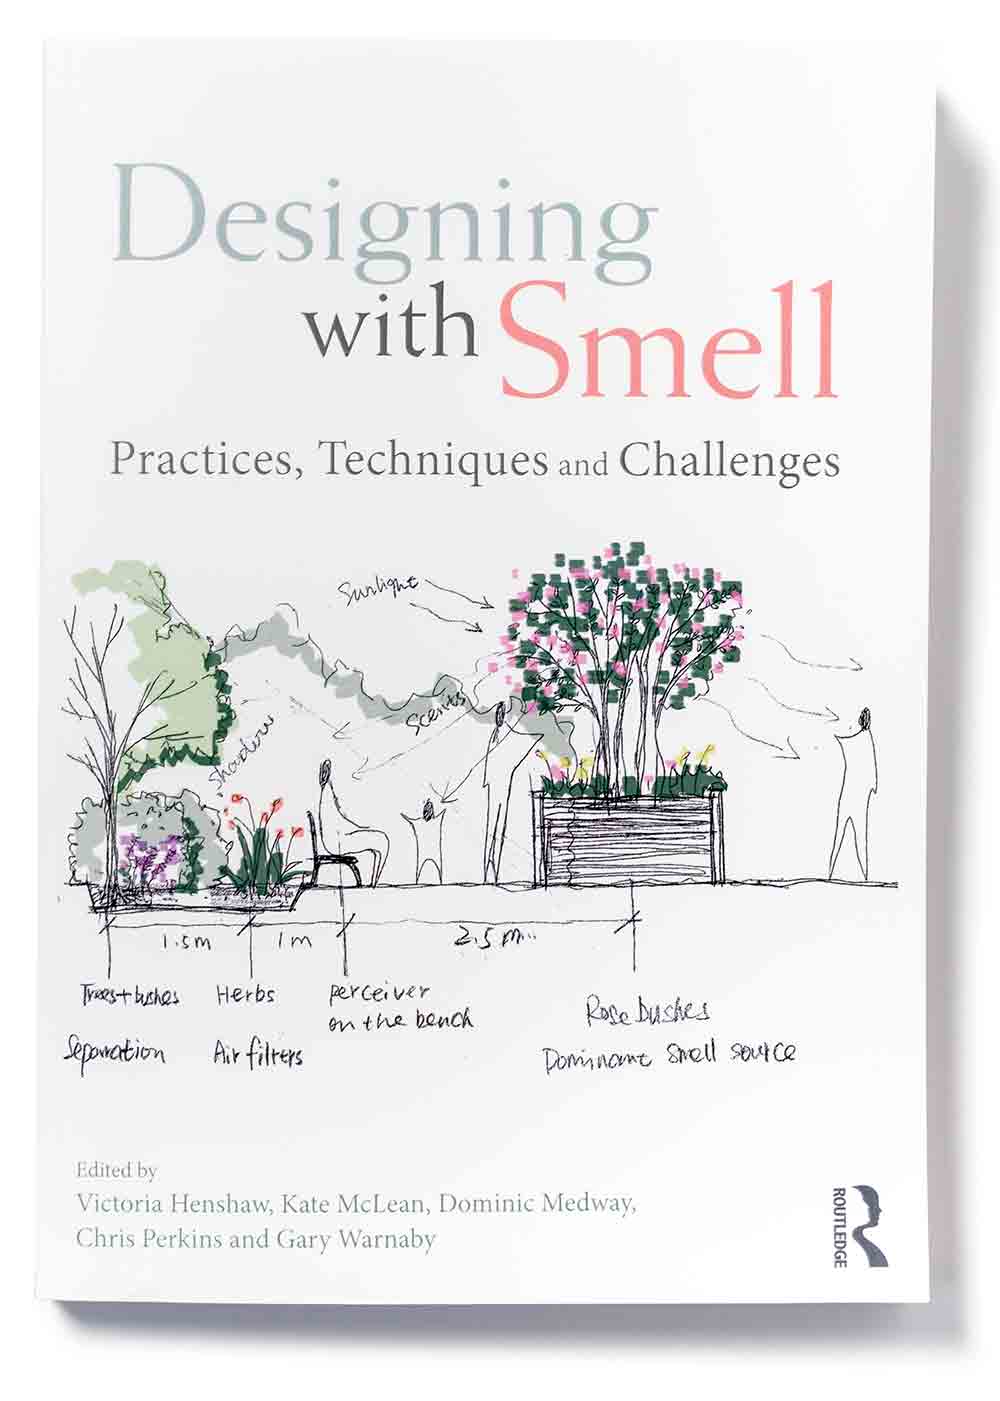 Designing with Smell: Practices, Techniques and Challenges – Victoria Henshaw, Kate McLean, Dominic Medway, Chris Perkins, Gary Warnaby